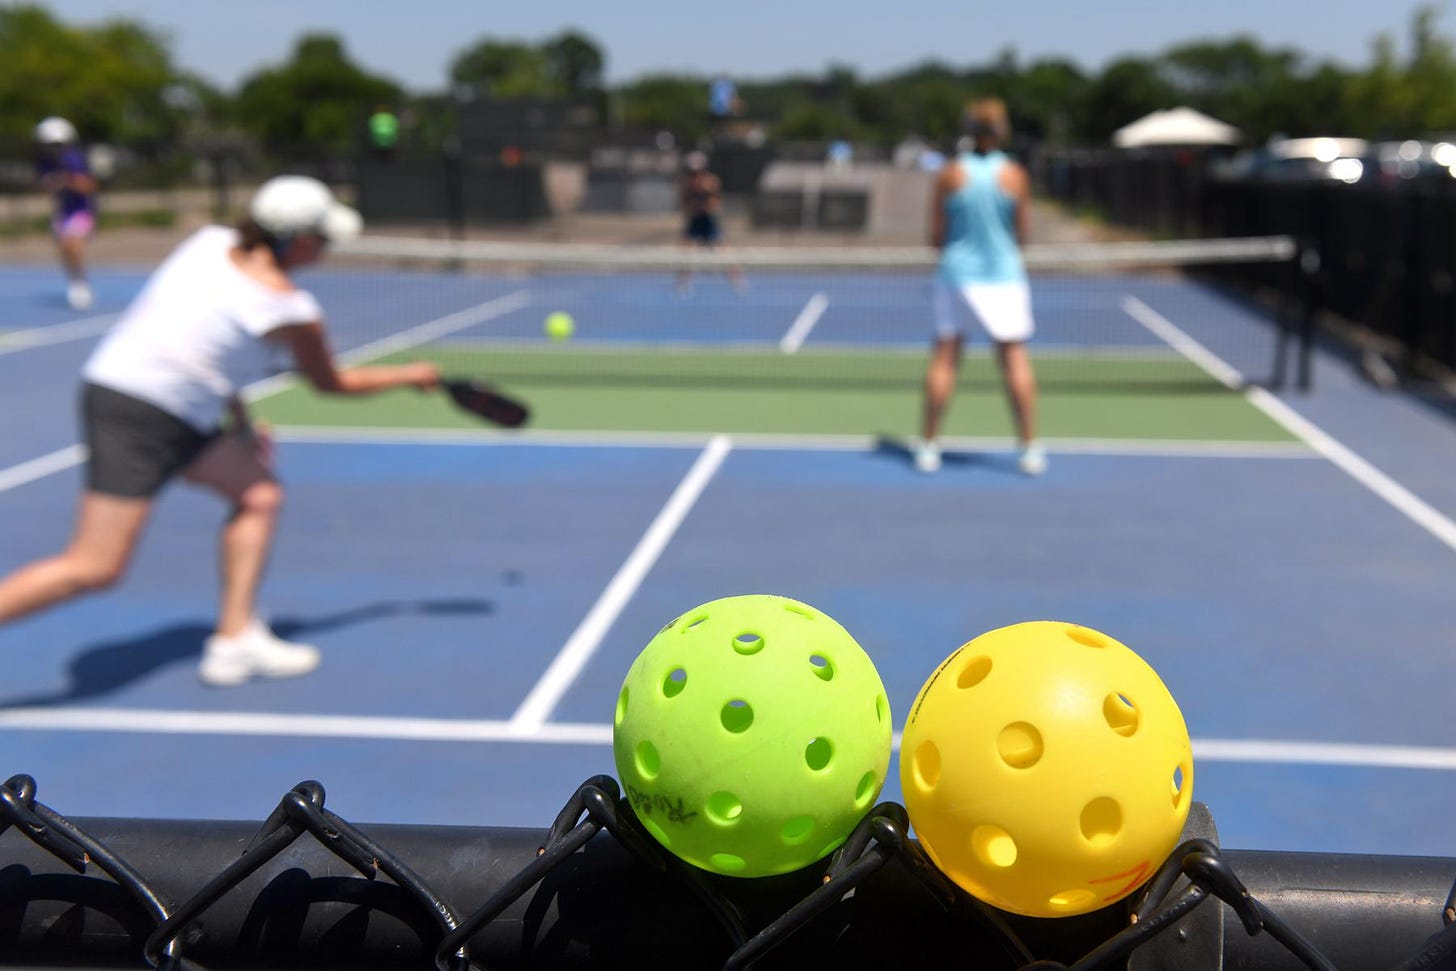 Pickleball in CT is growing quickly, but not without controversy